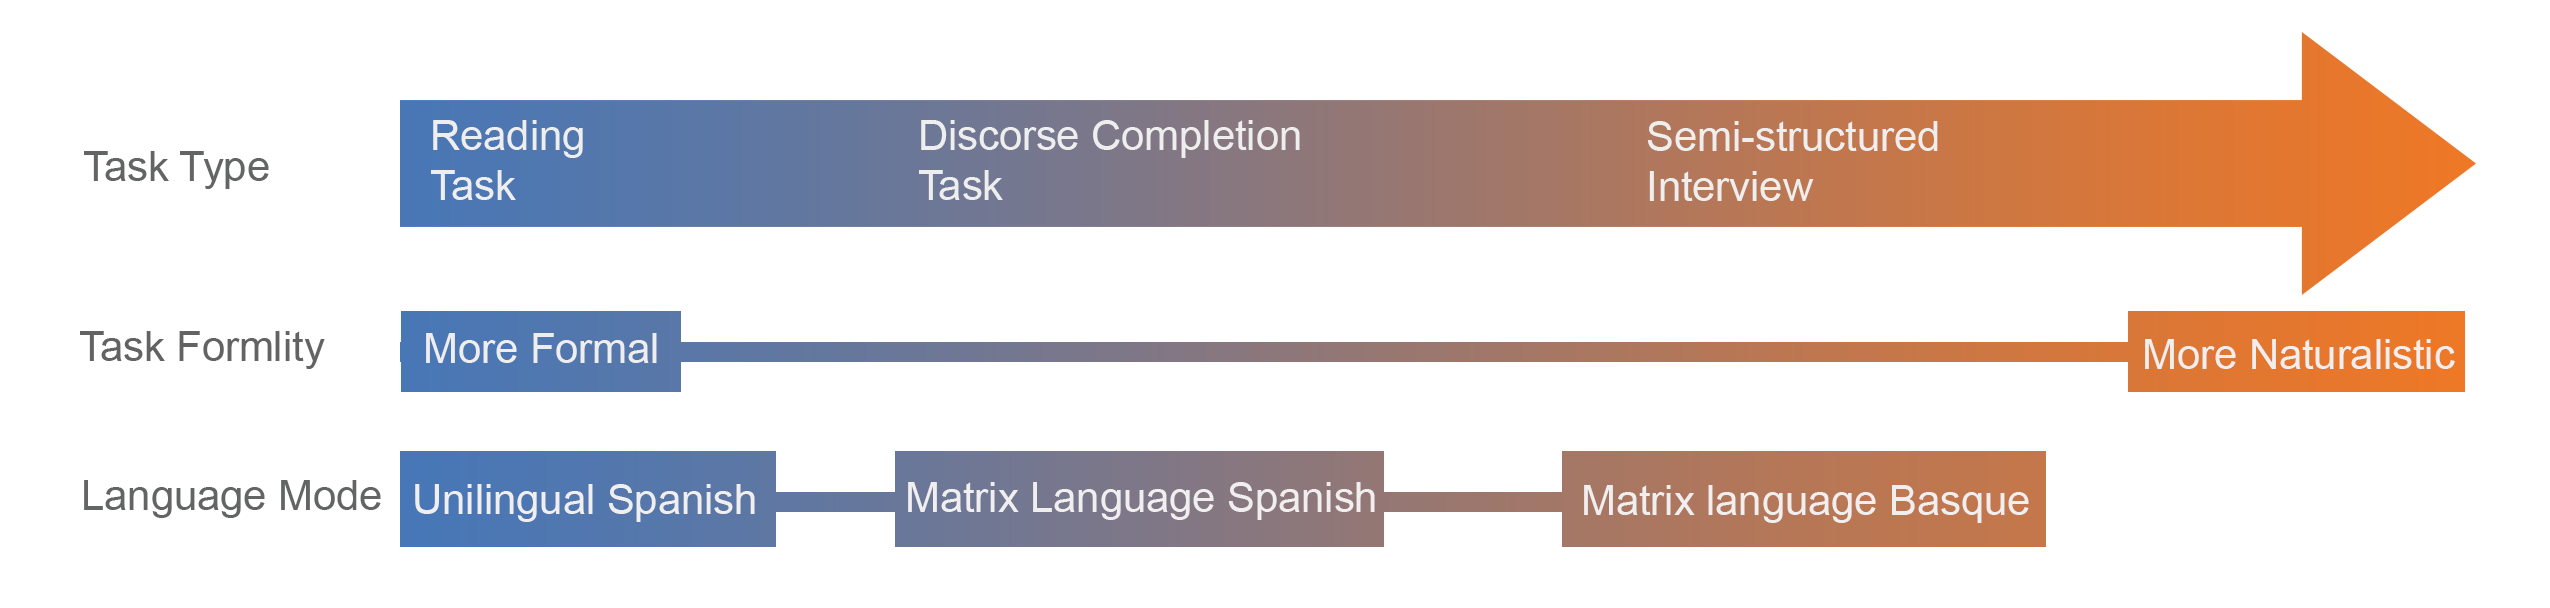 Progression of speech tasks administered to participants